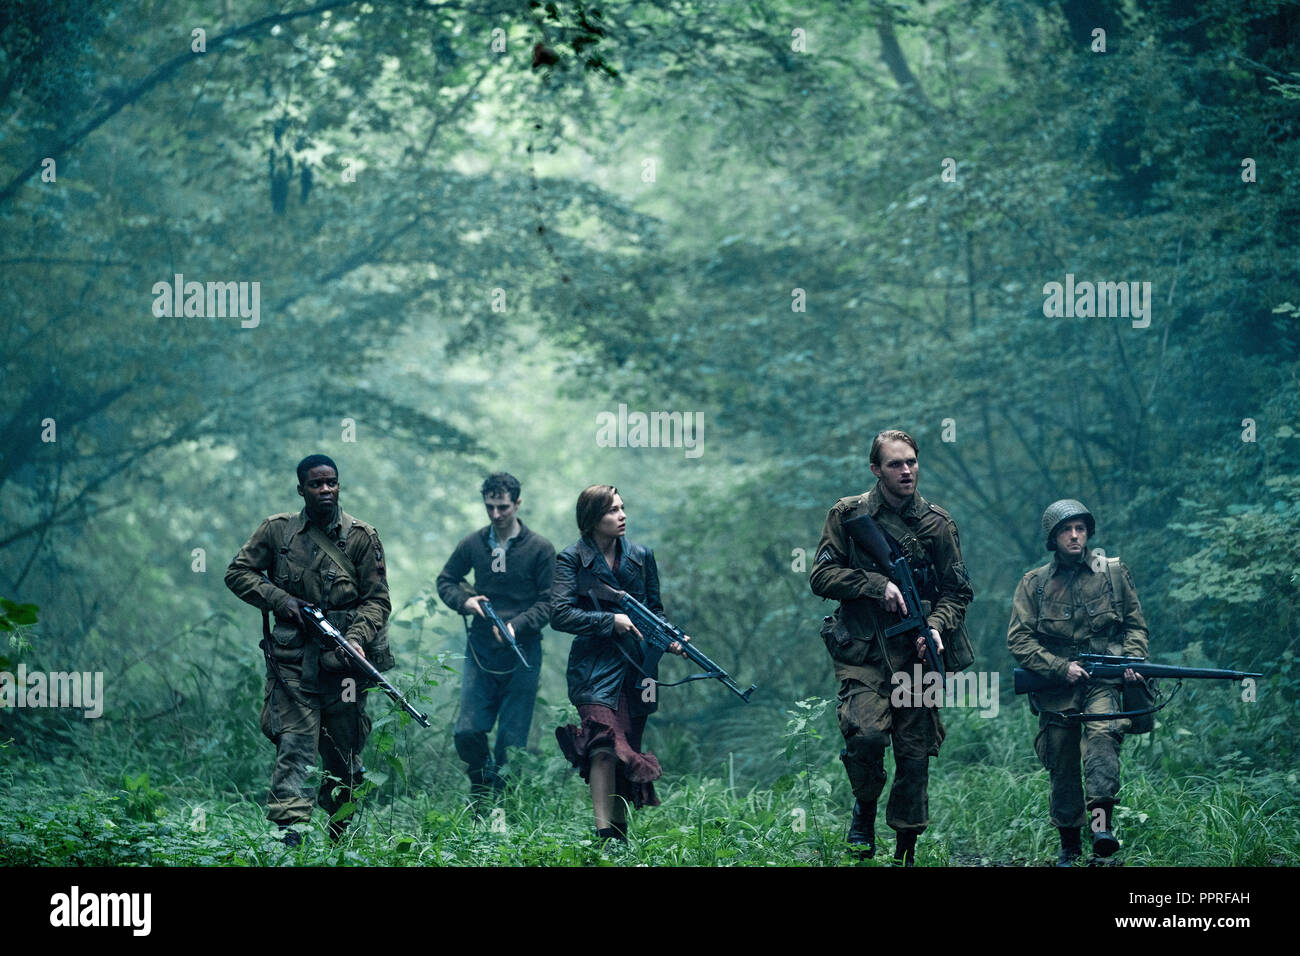 RELEASE DATE: November 9, 2018 TITLE: Overlord STUDIO: Paramount Pictures DIRECTOR: Julius Avery PLOT: The story of two American soldiers behind enemy lines on D Day. STARRING: (L-R) Jovan Adepo as Boyce, Dominic Applewhite as Rosenfeld, Mathilde Ollivier as Chloe, Wyatt Russell as Ford, John Magaro as Tibbet. (Credit Image: © Paramount Pictures/Entertainment Pictures) Stock Photo